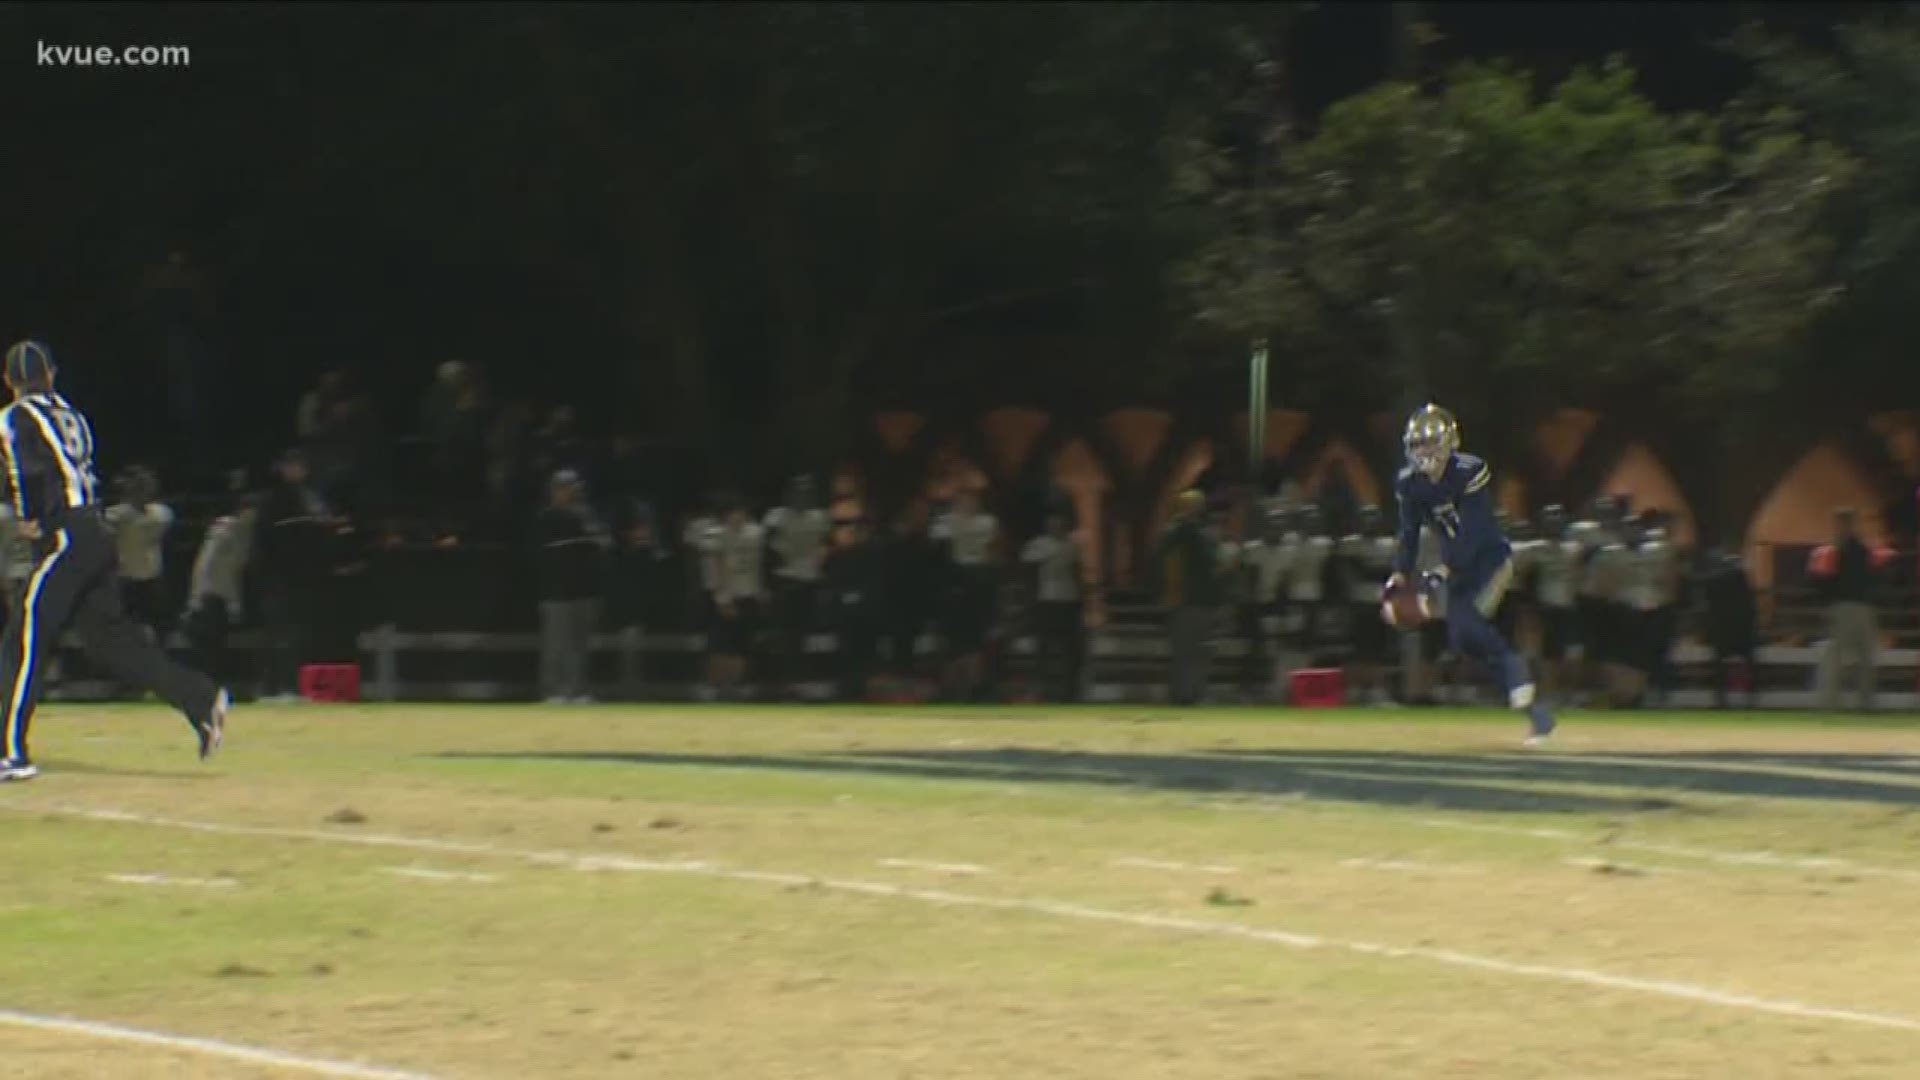 Three plays. One winner. Which play was your favorite to win KVUE's Big Save of the Week?